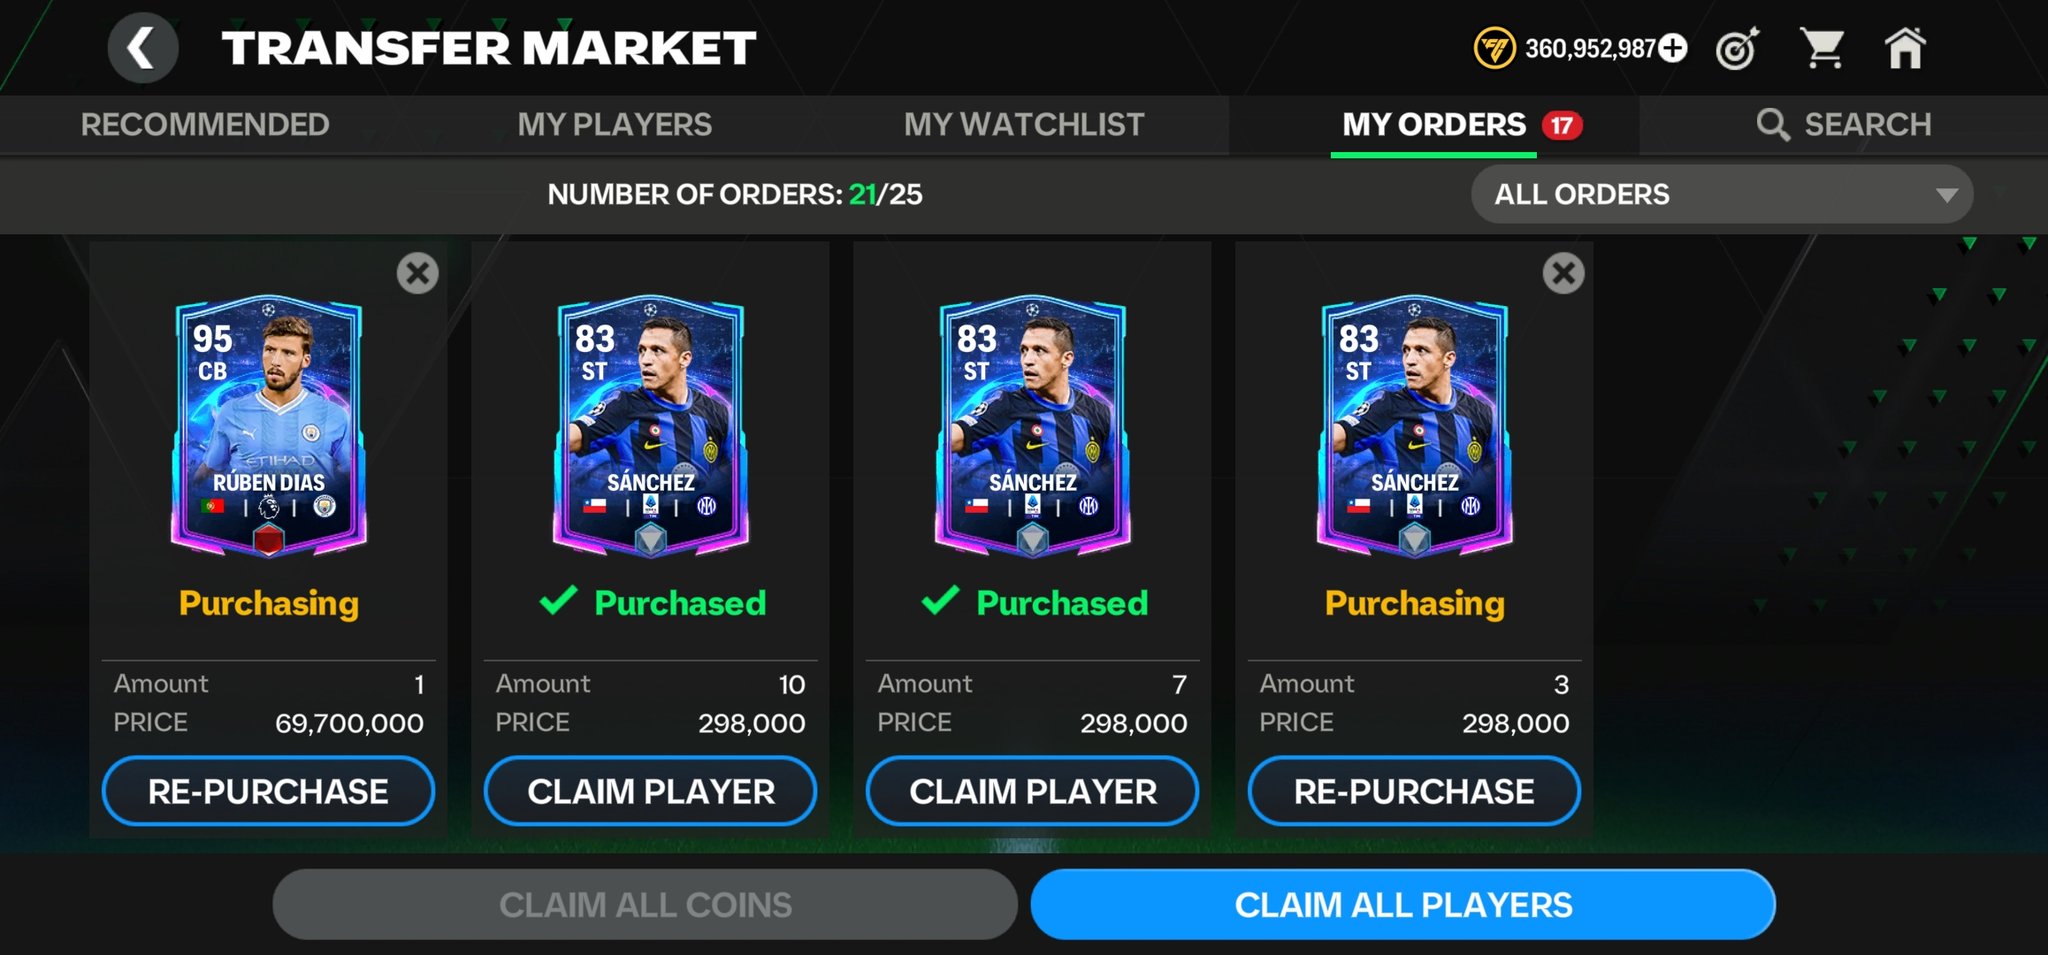 Djmixfoo on X: Guide to master FIFA Mobile 22. Breakdown of everything  need to know to progress quickly and maximise OVR    / X